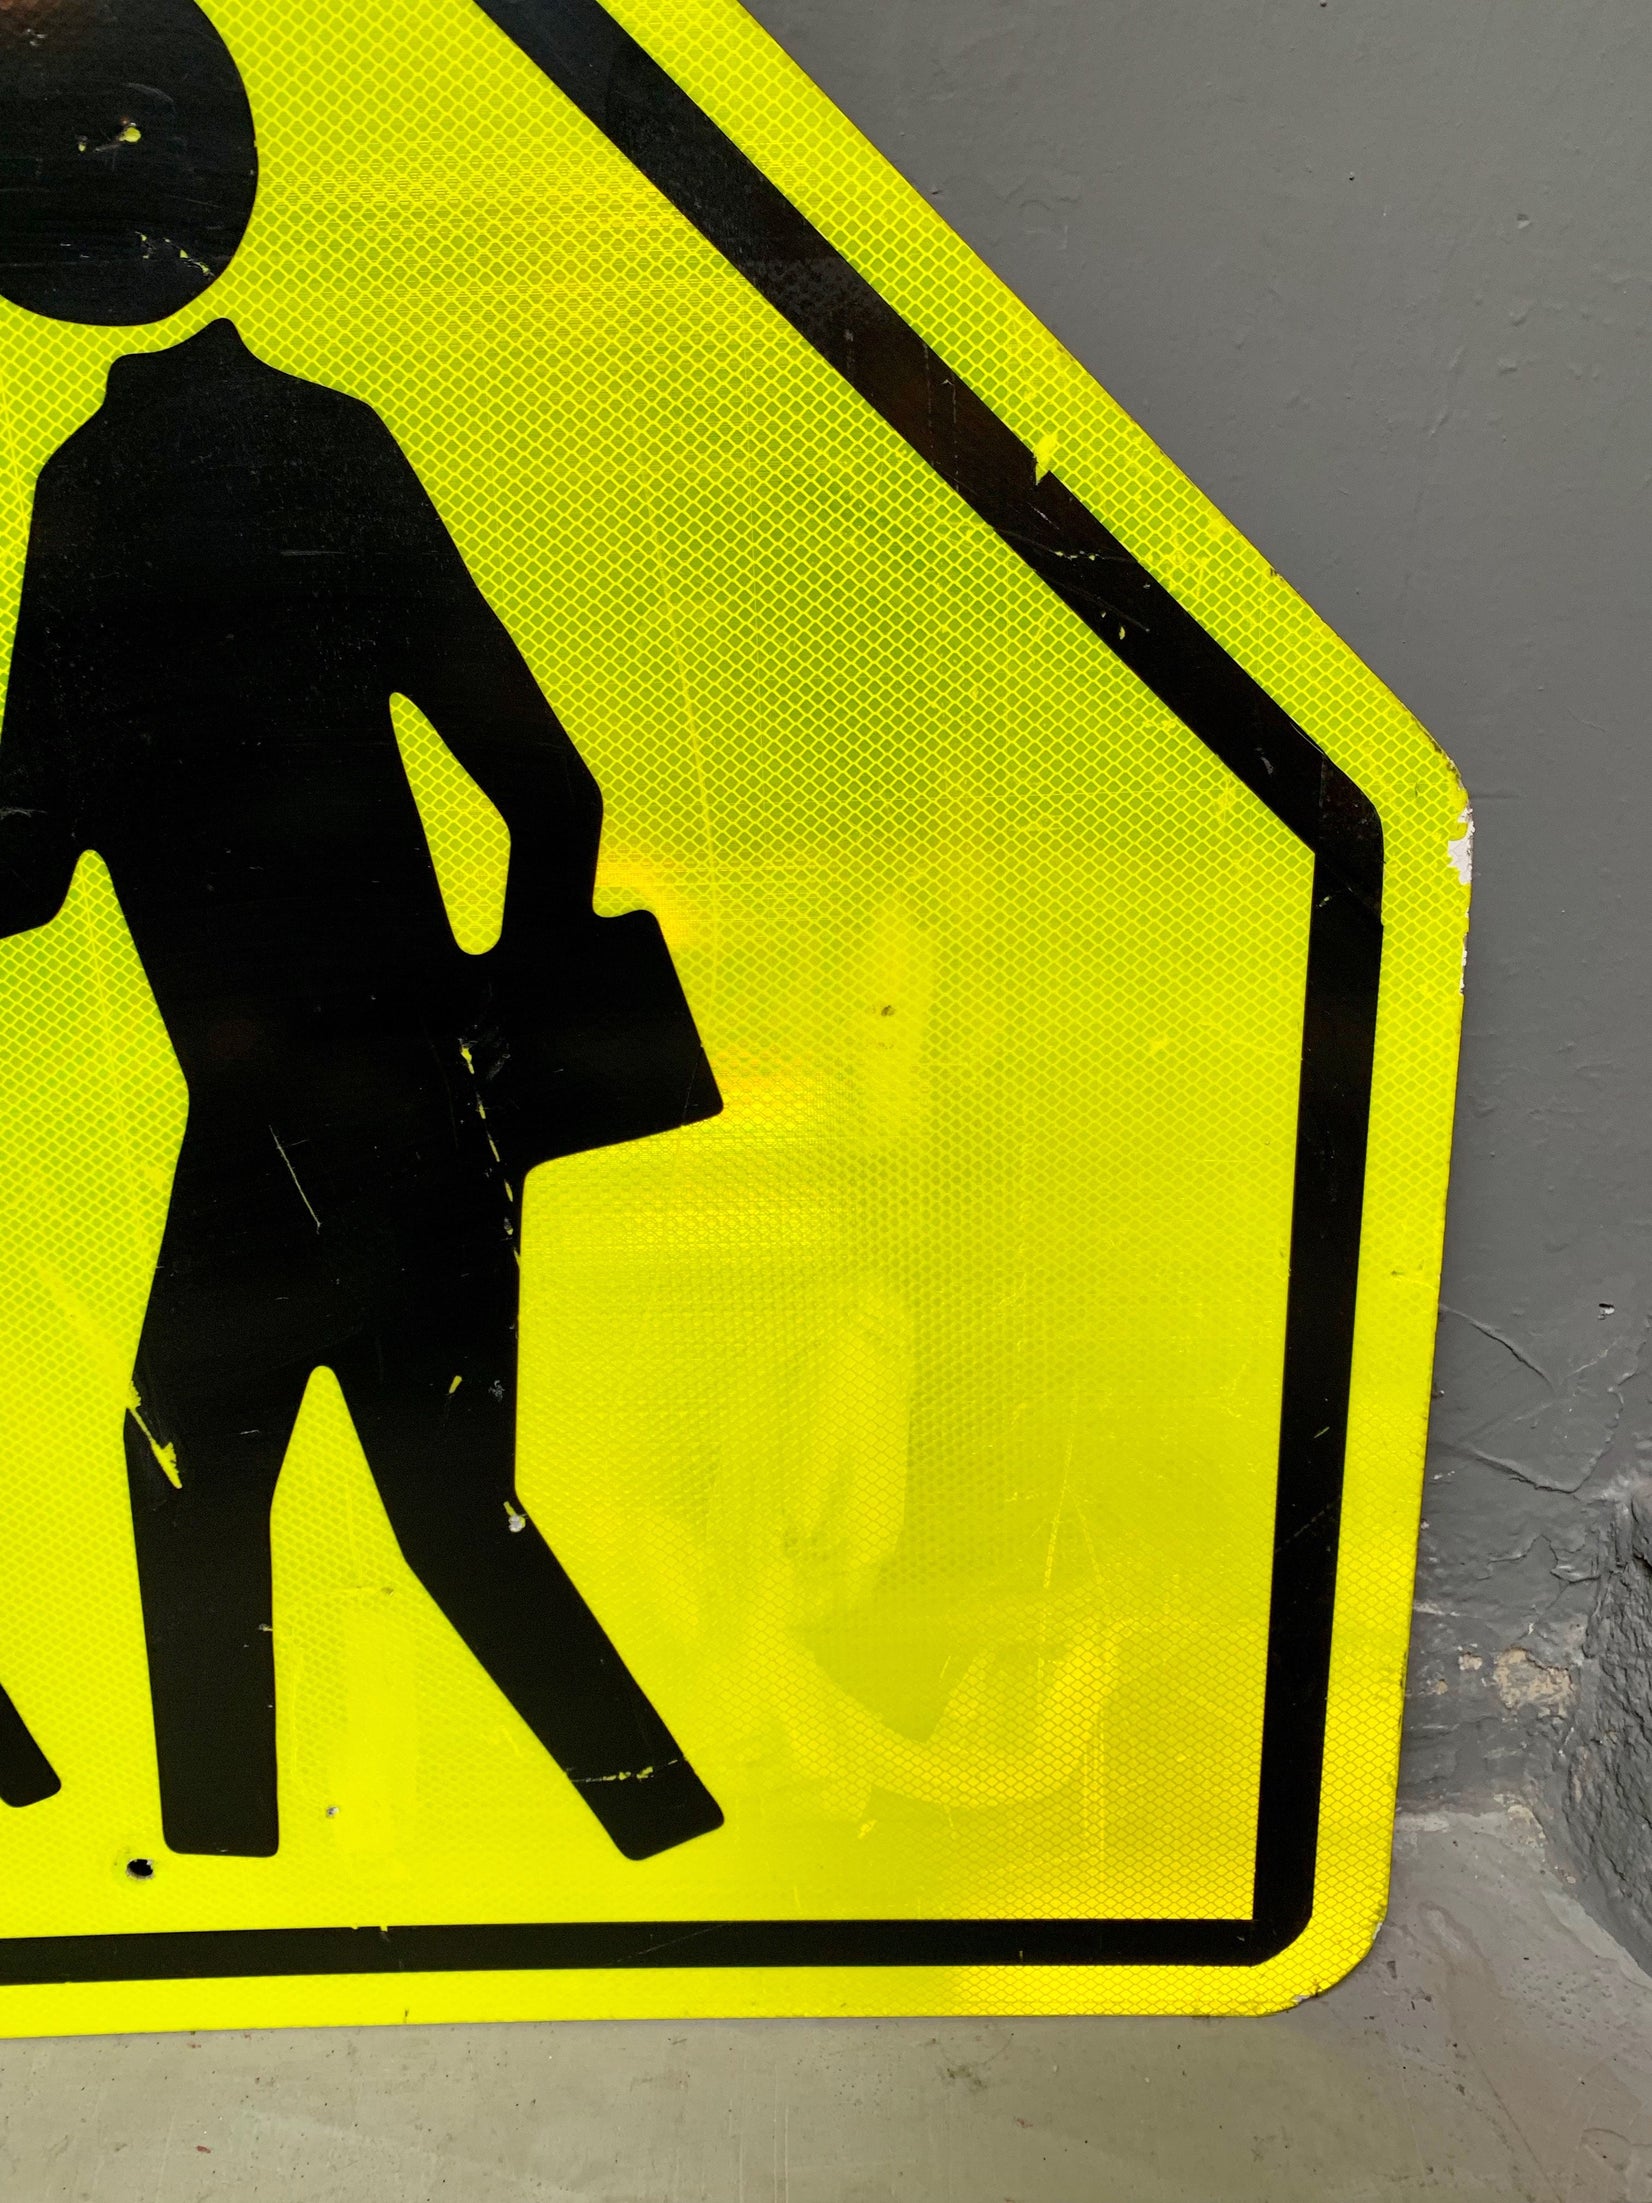 Acid Yellow Reflective Pedestrian Road Sign from Los Angeles